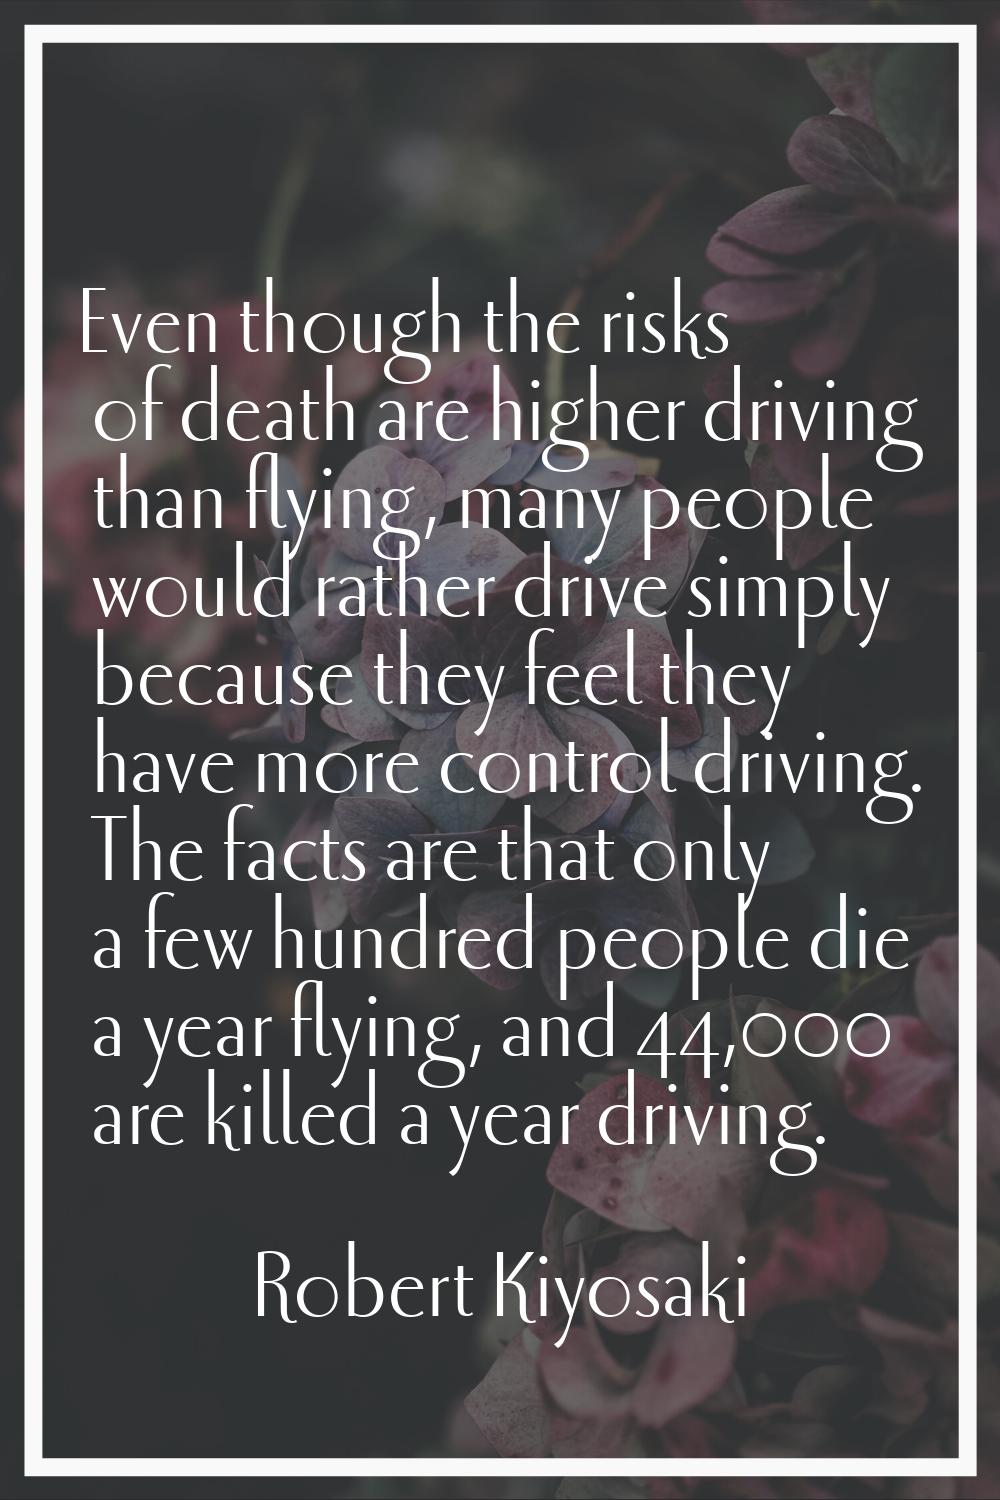 Even though the risks of death are higher driving than flying, many people would rather drive simpl